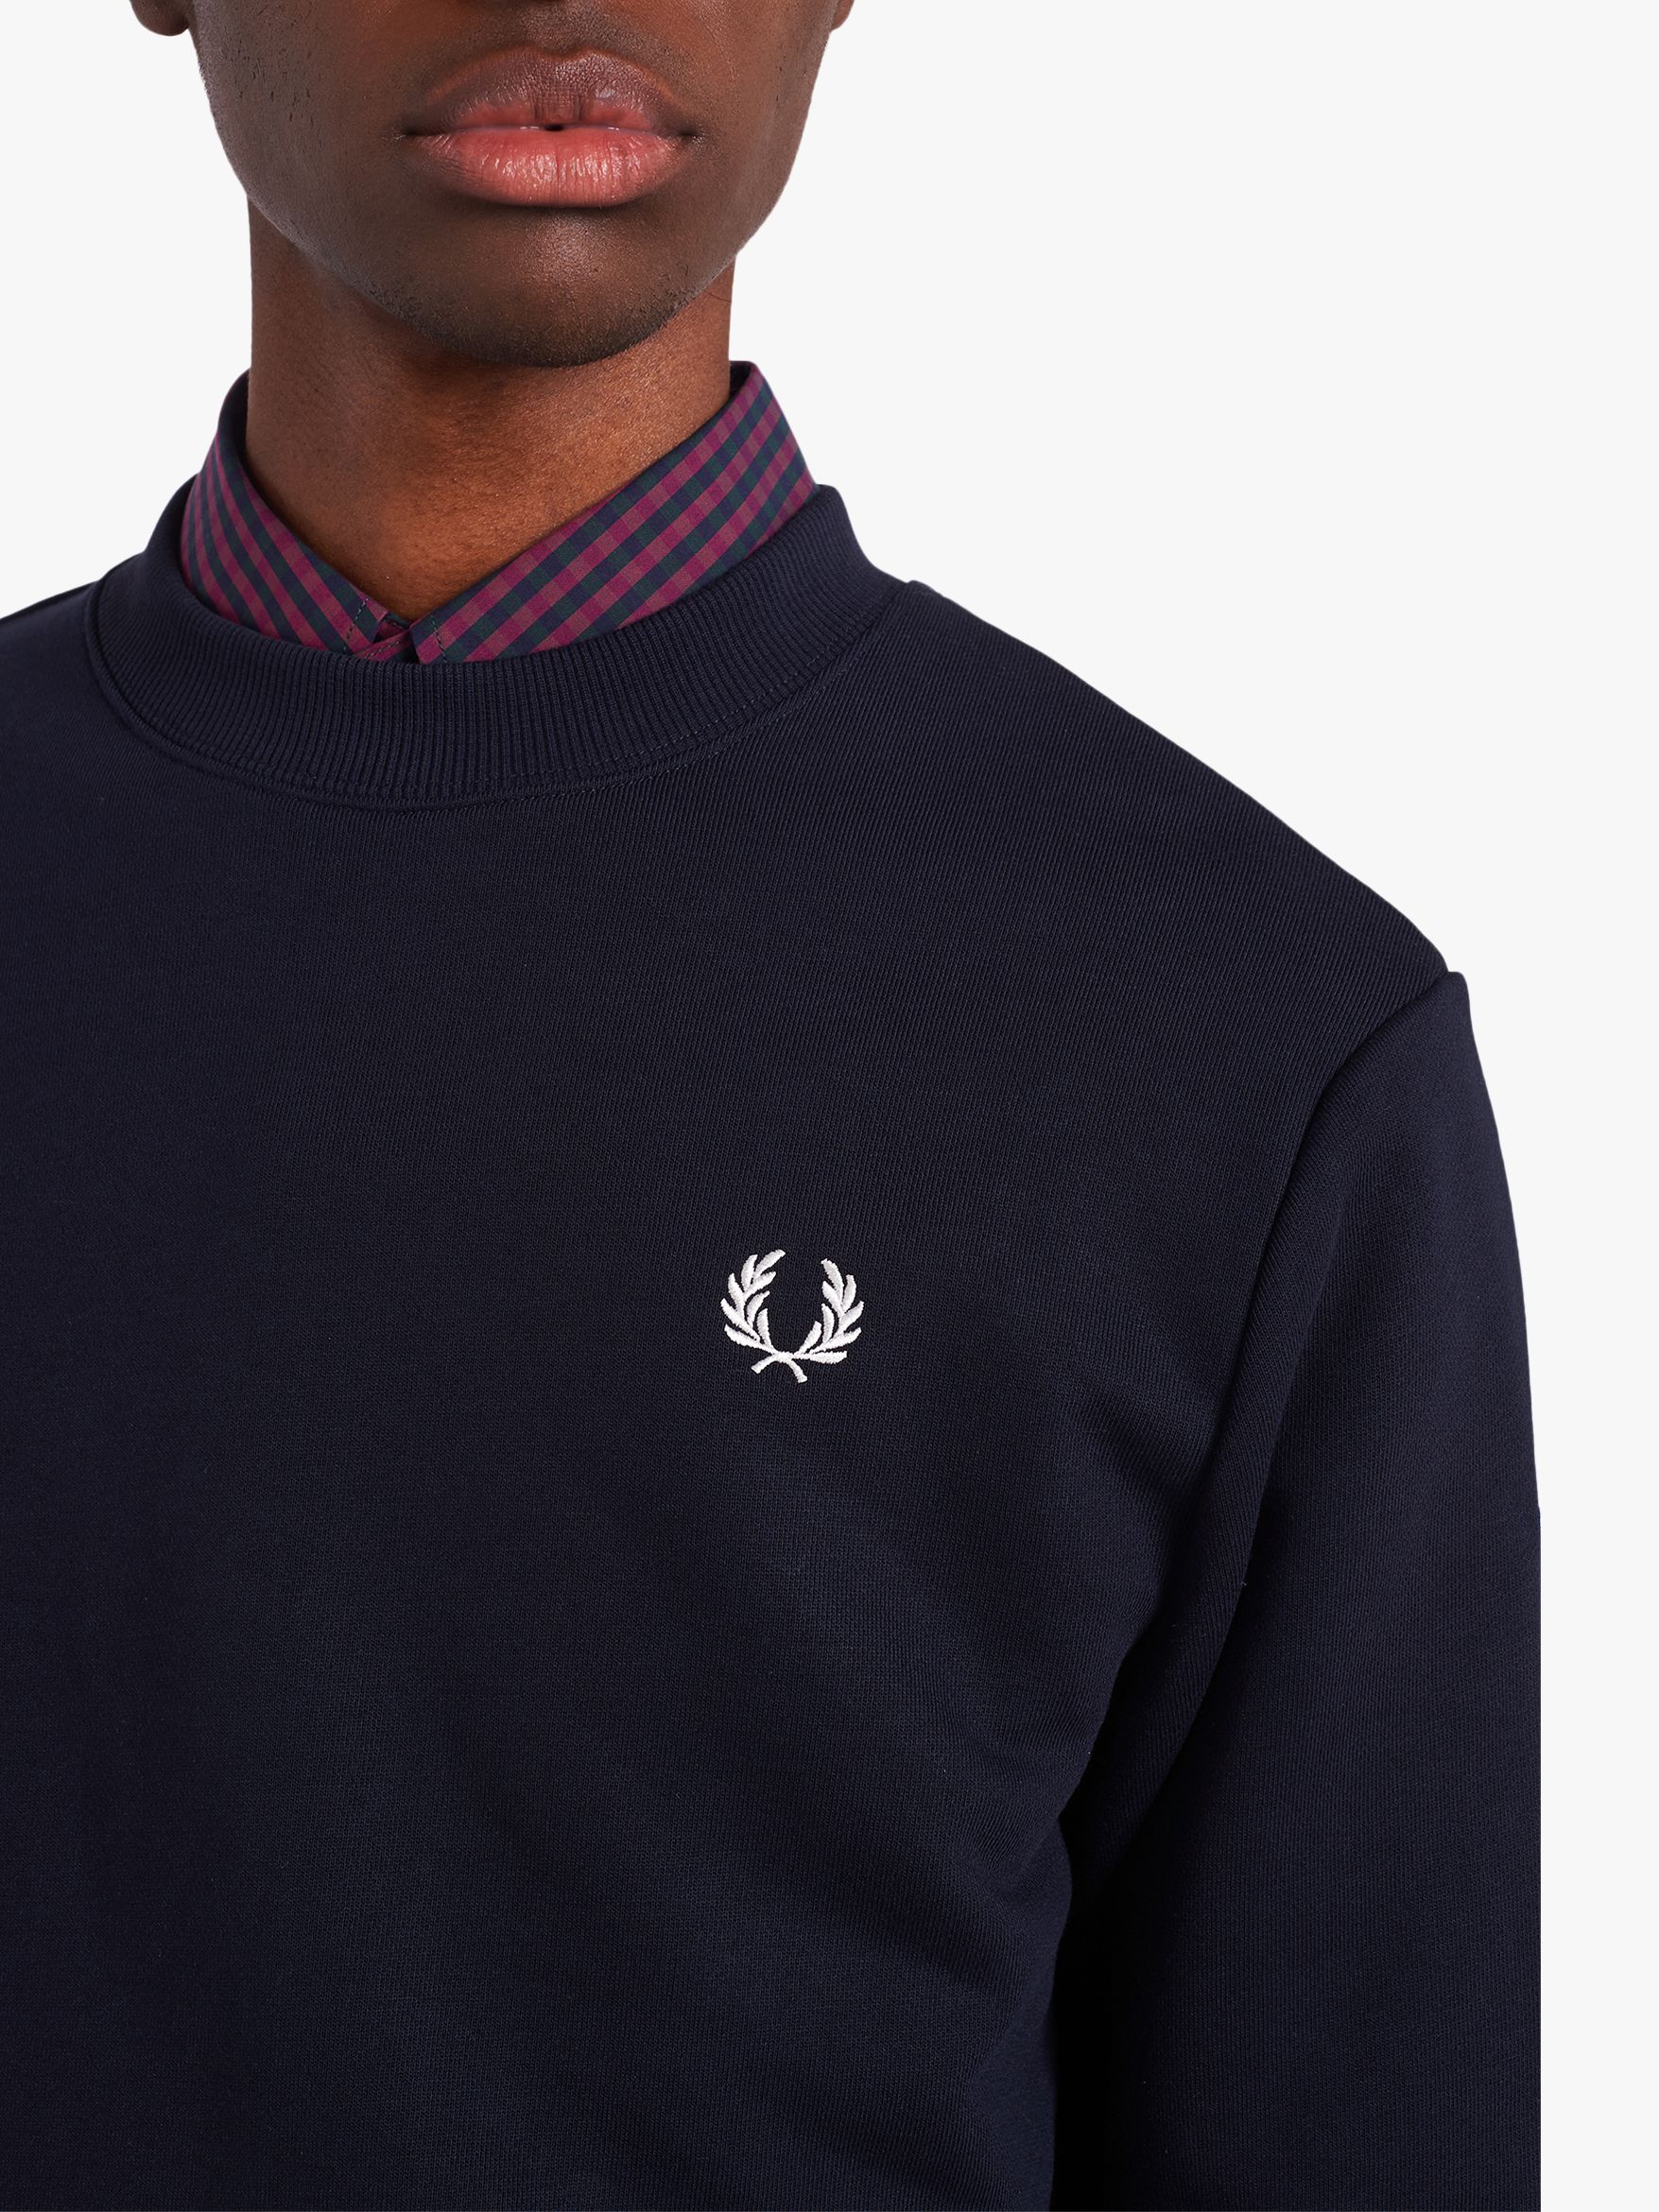 Fred Perry Crew Neck Sweatshirt, Blue Navy 248 at John Lewis & Partners